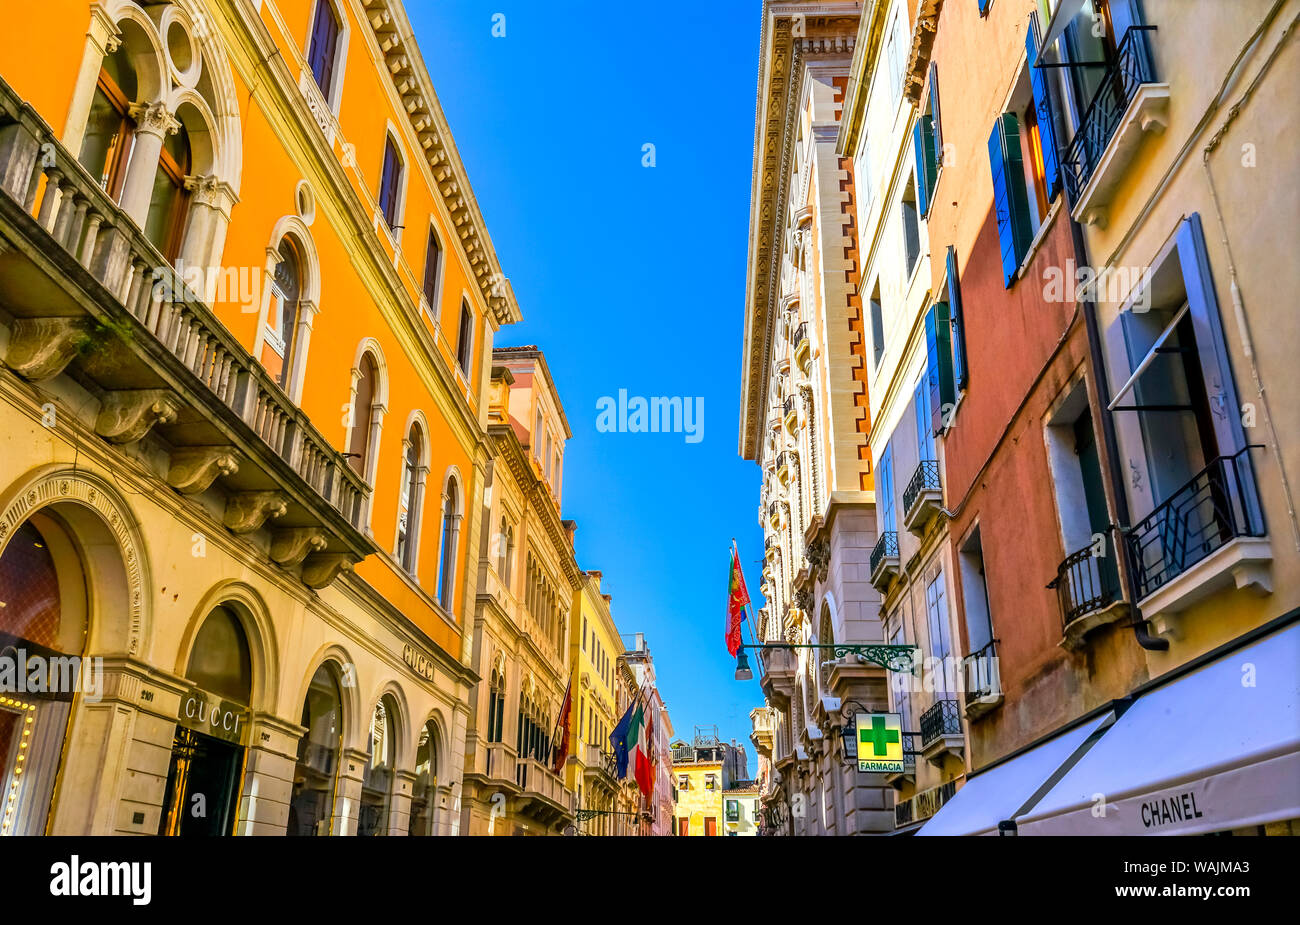 Colorful sunny main shopping street with shops and restaurants, Venice, Italy. Stock Photo